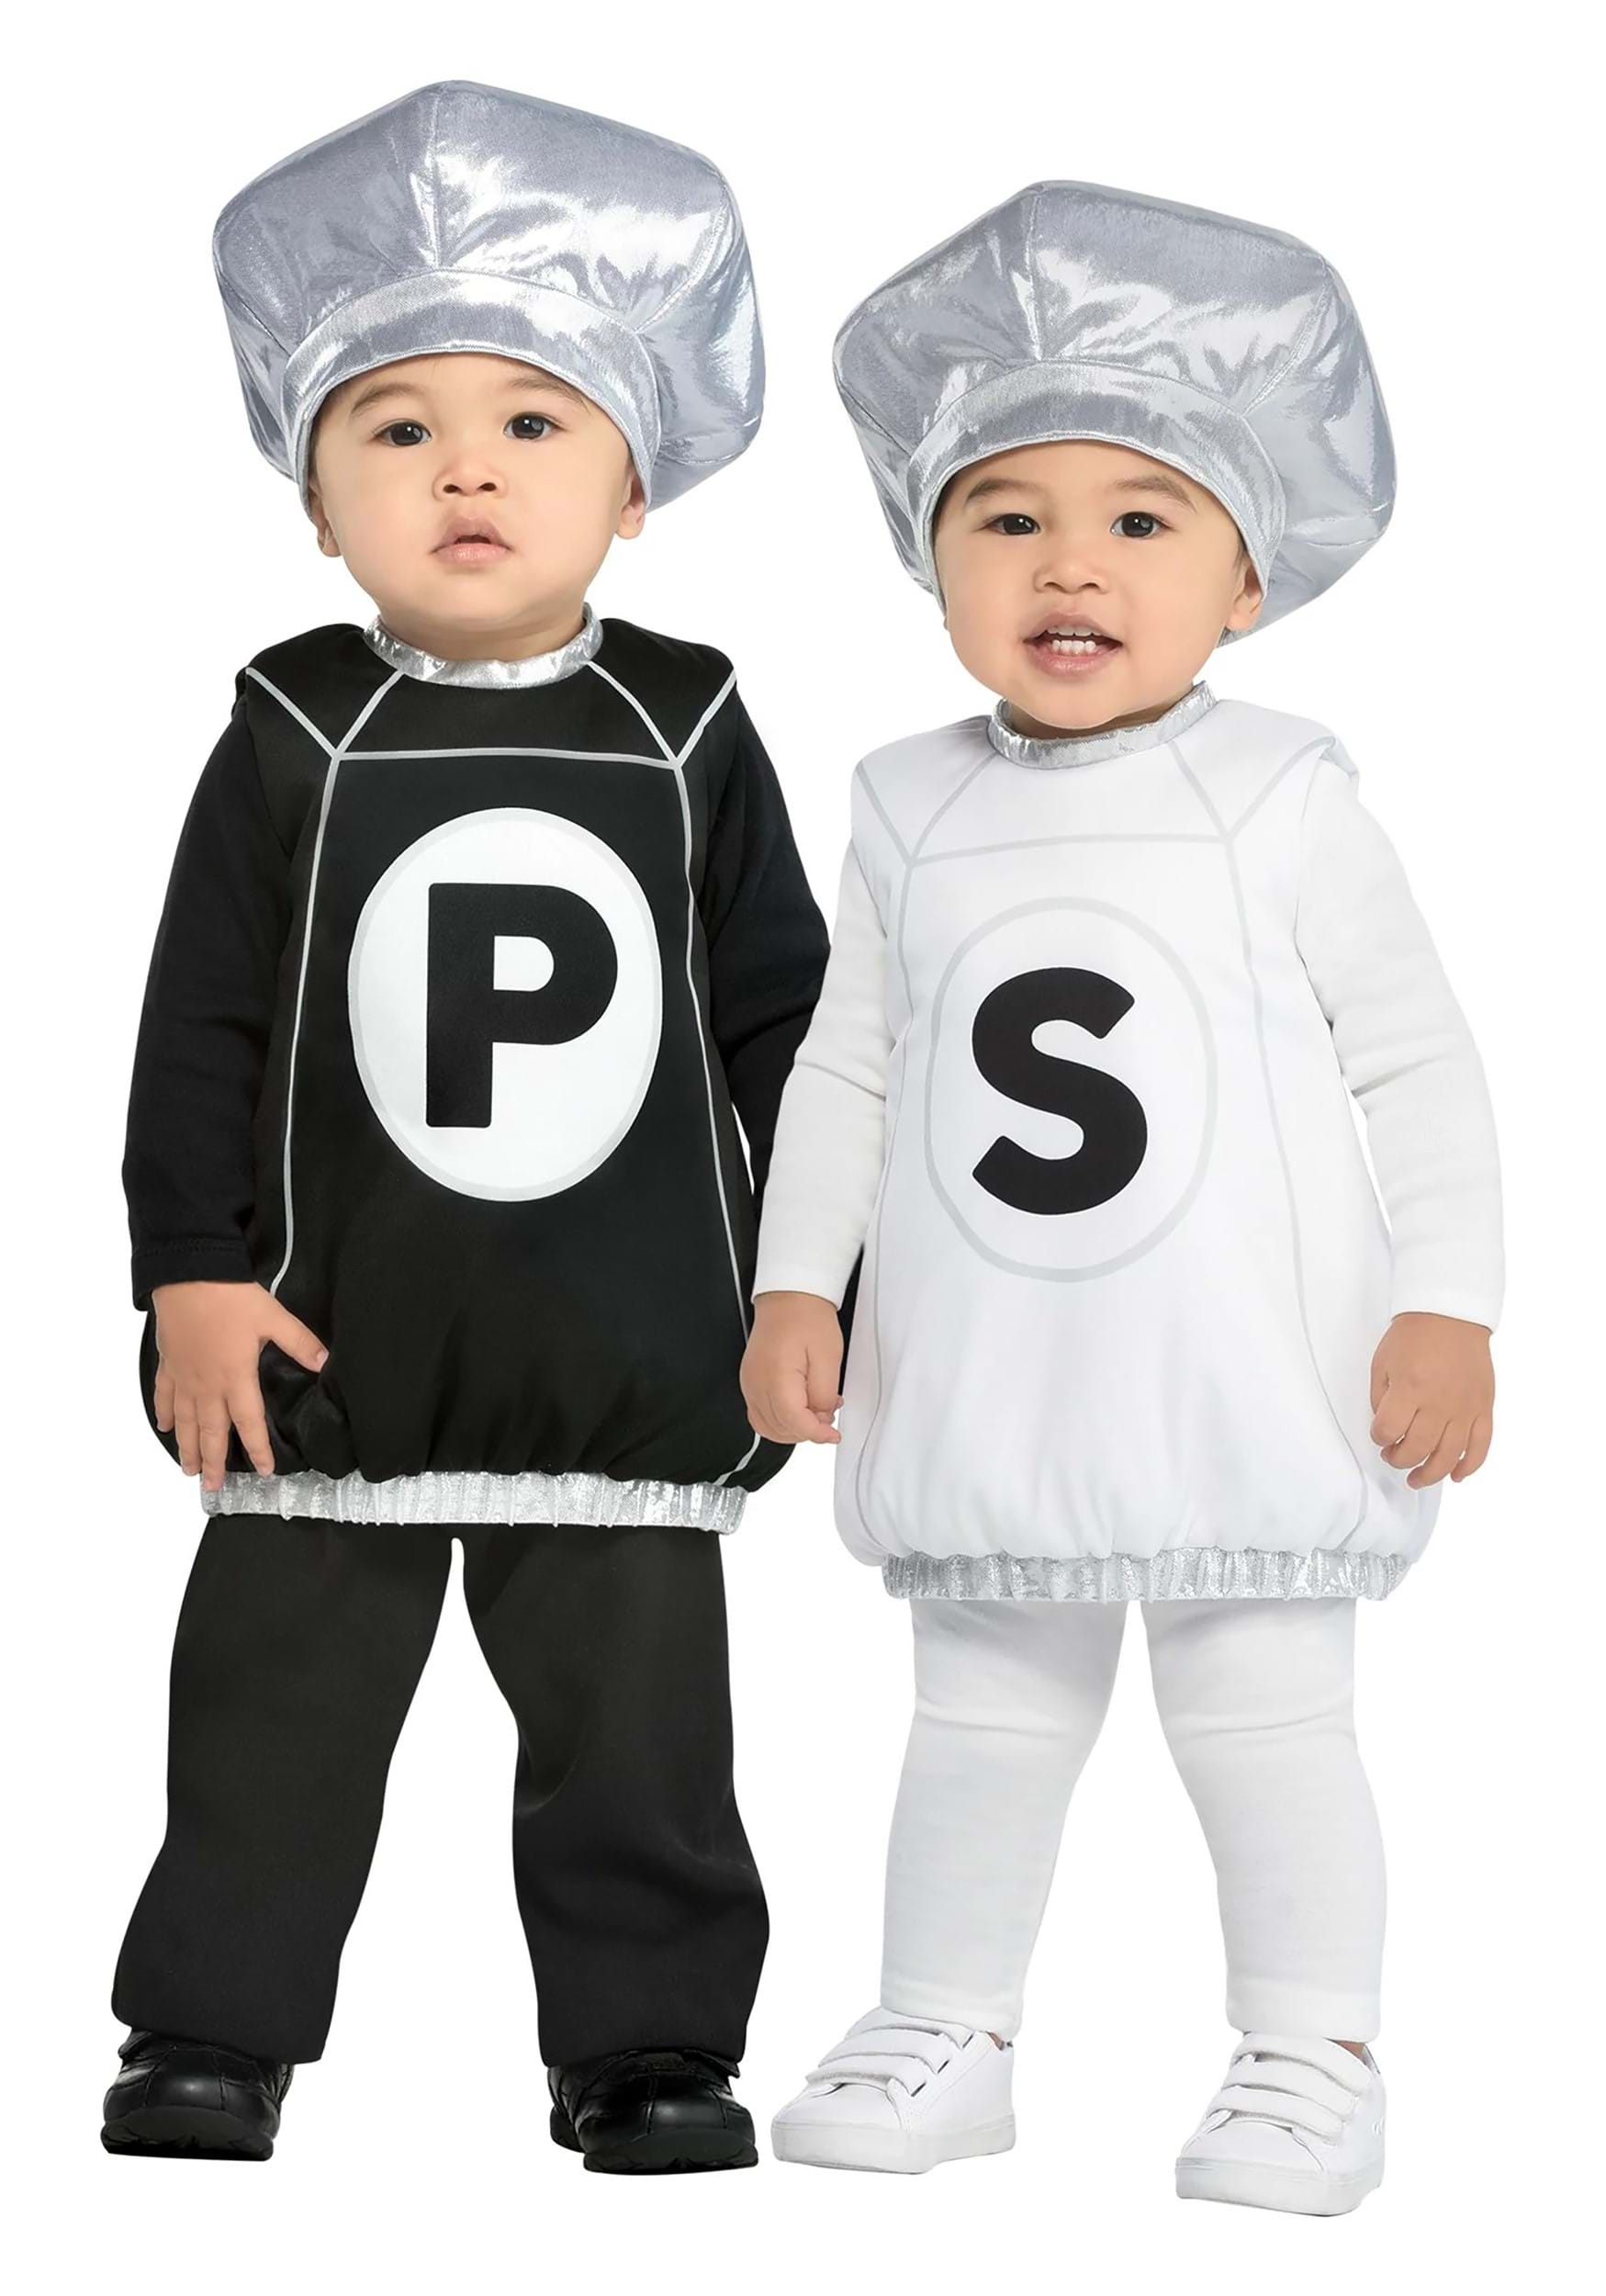 https://images.halloweencostumes.com/products/82642/1-1/infant-salt-and-pepper-shaker-sweeties-costumes.jpg